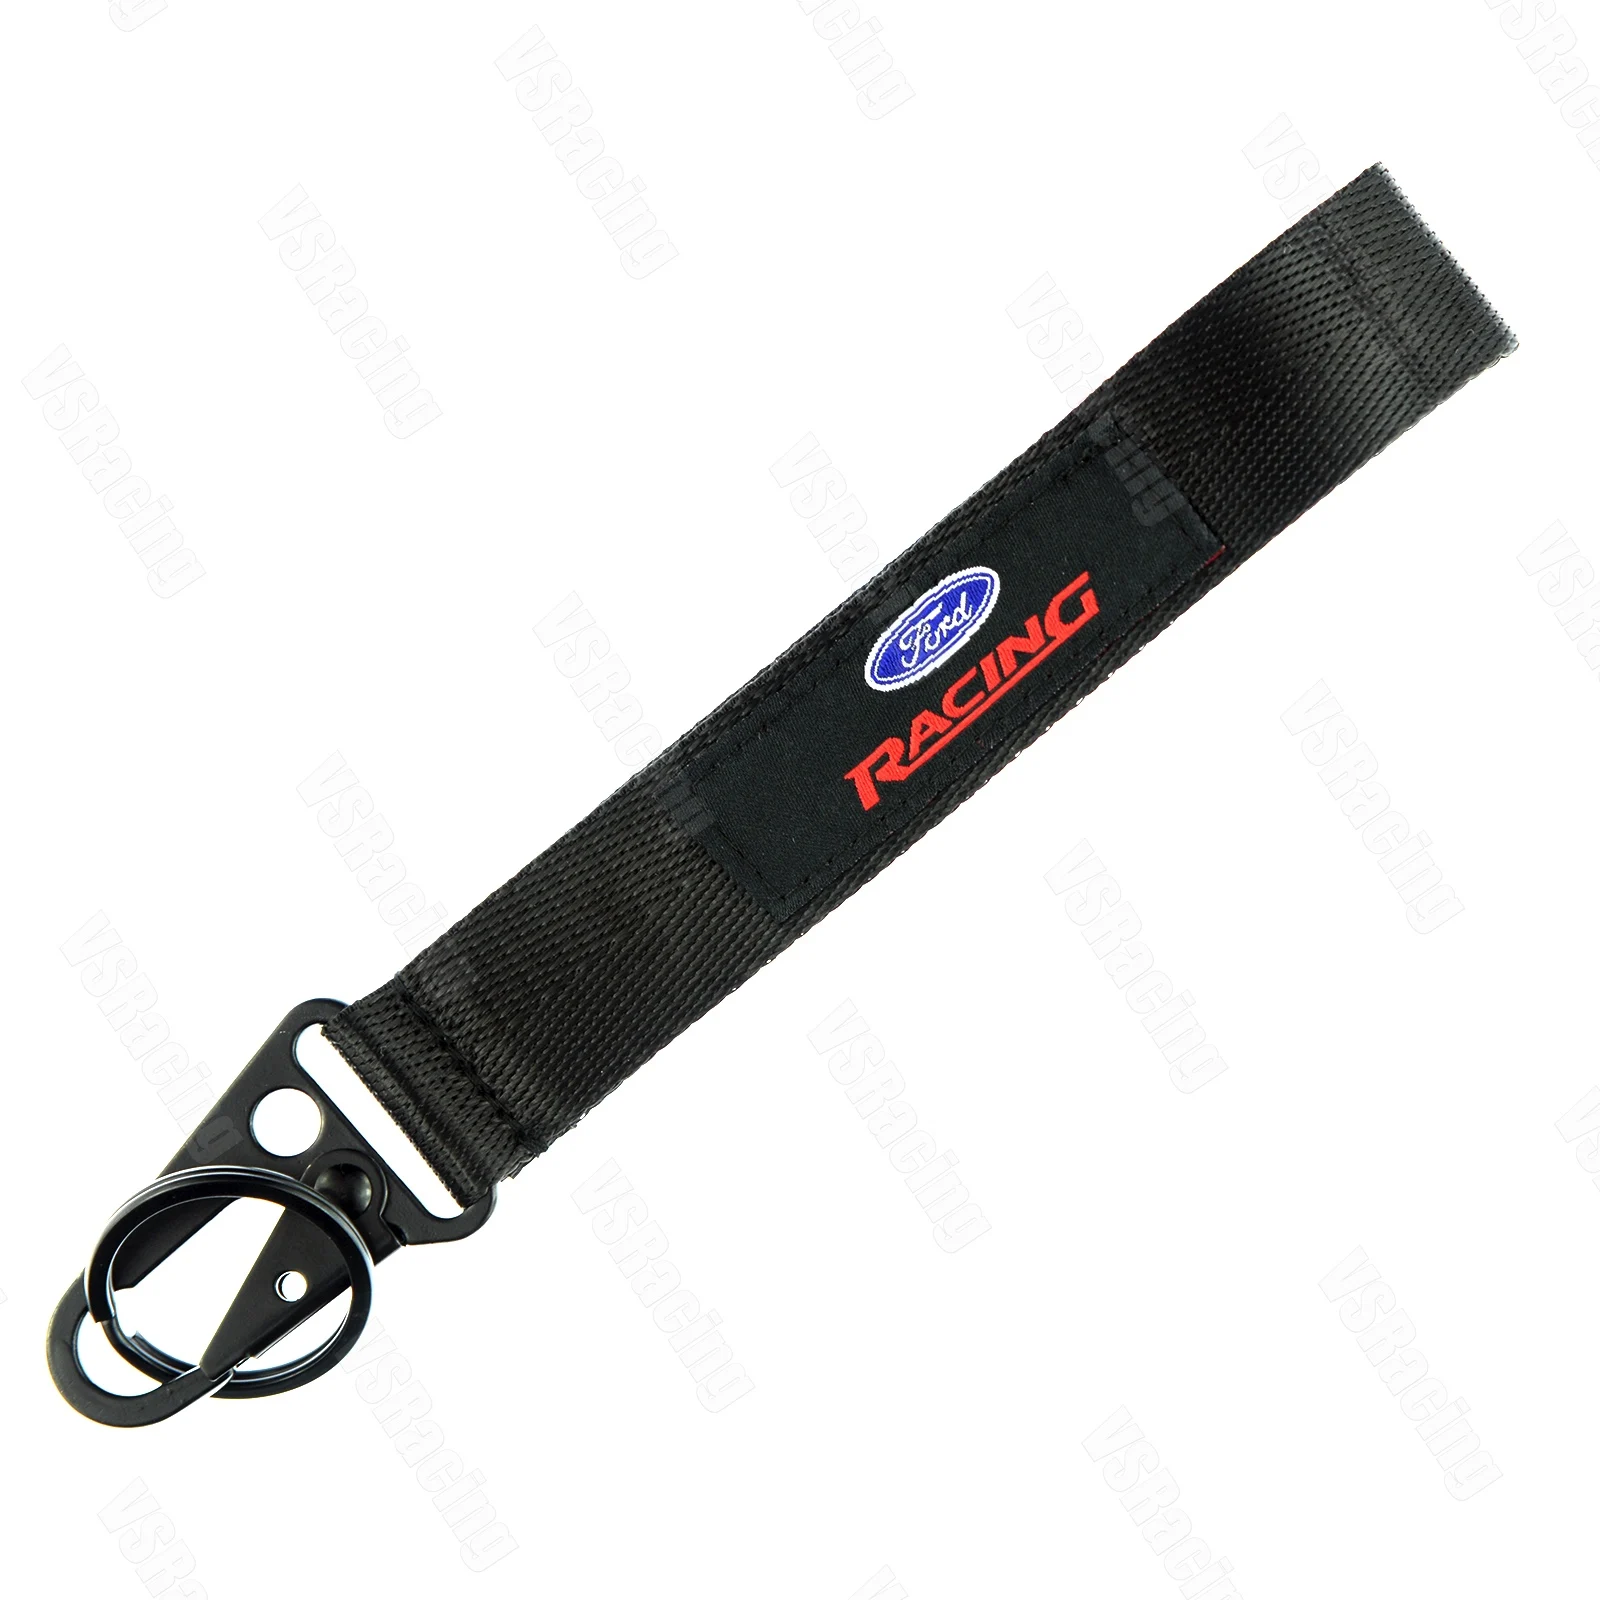 FORD Lanyard 4 x dust caps Key ring key chain Lanyards for neck Card Holder 